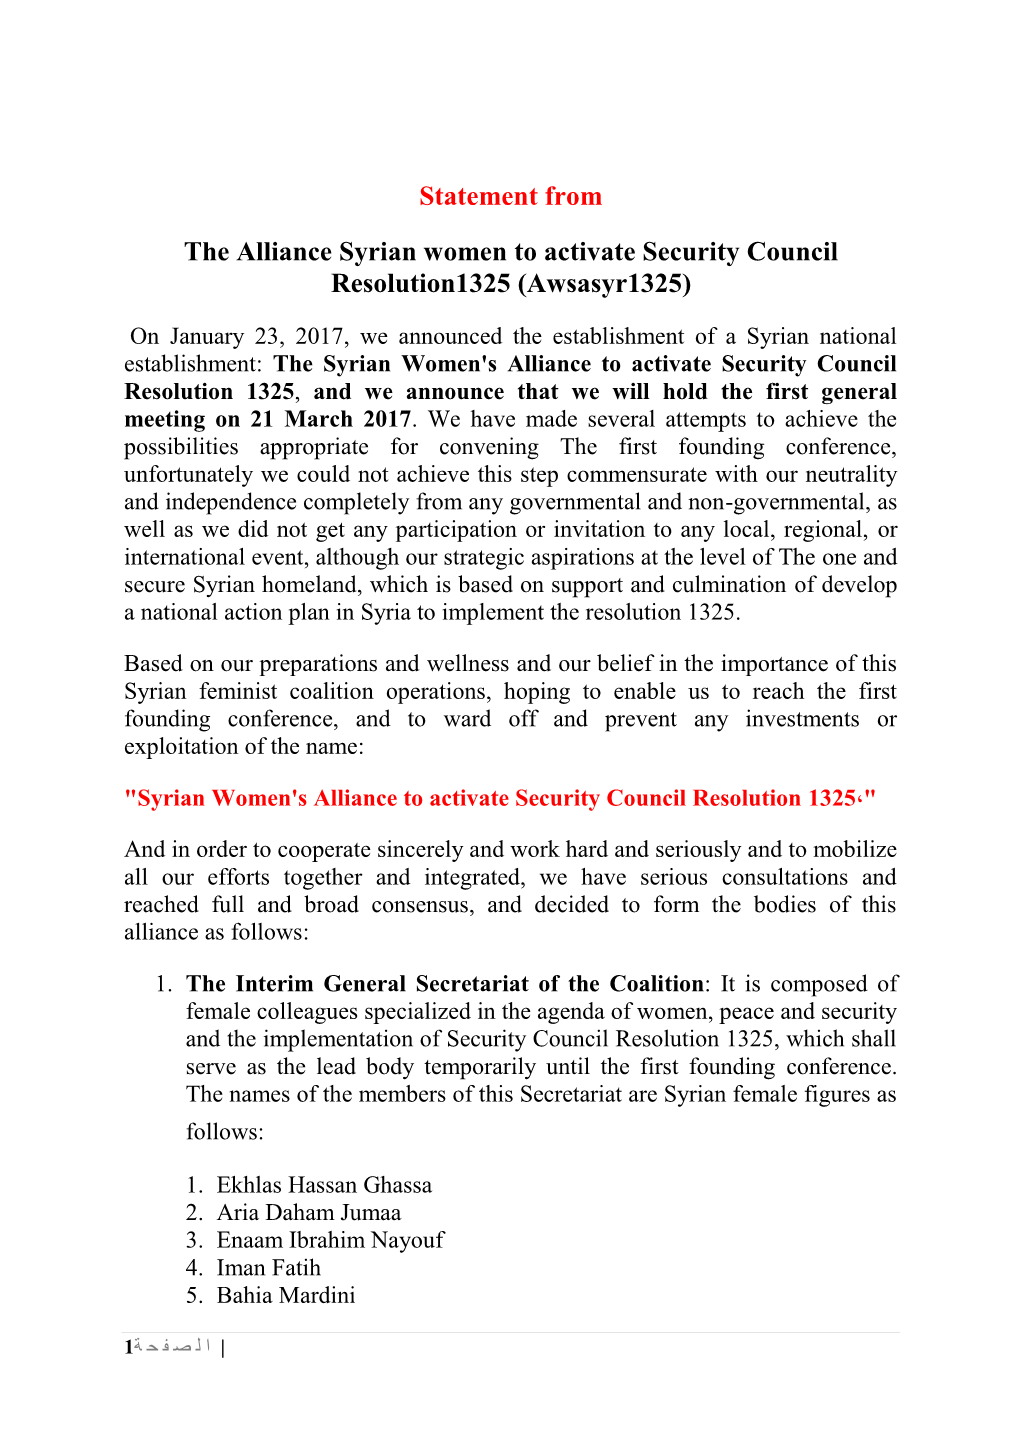 Statement from the Alliance Syrian Women to Activate Security Council